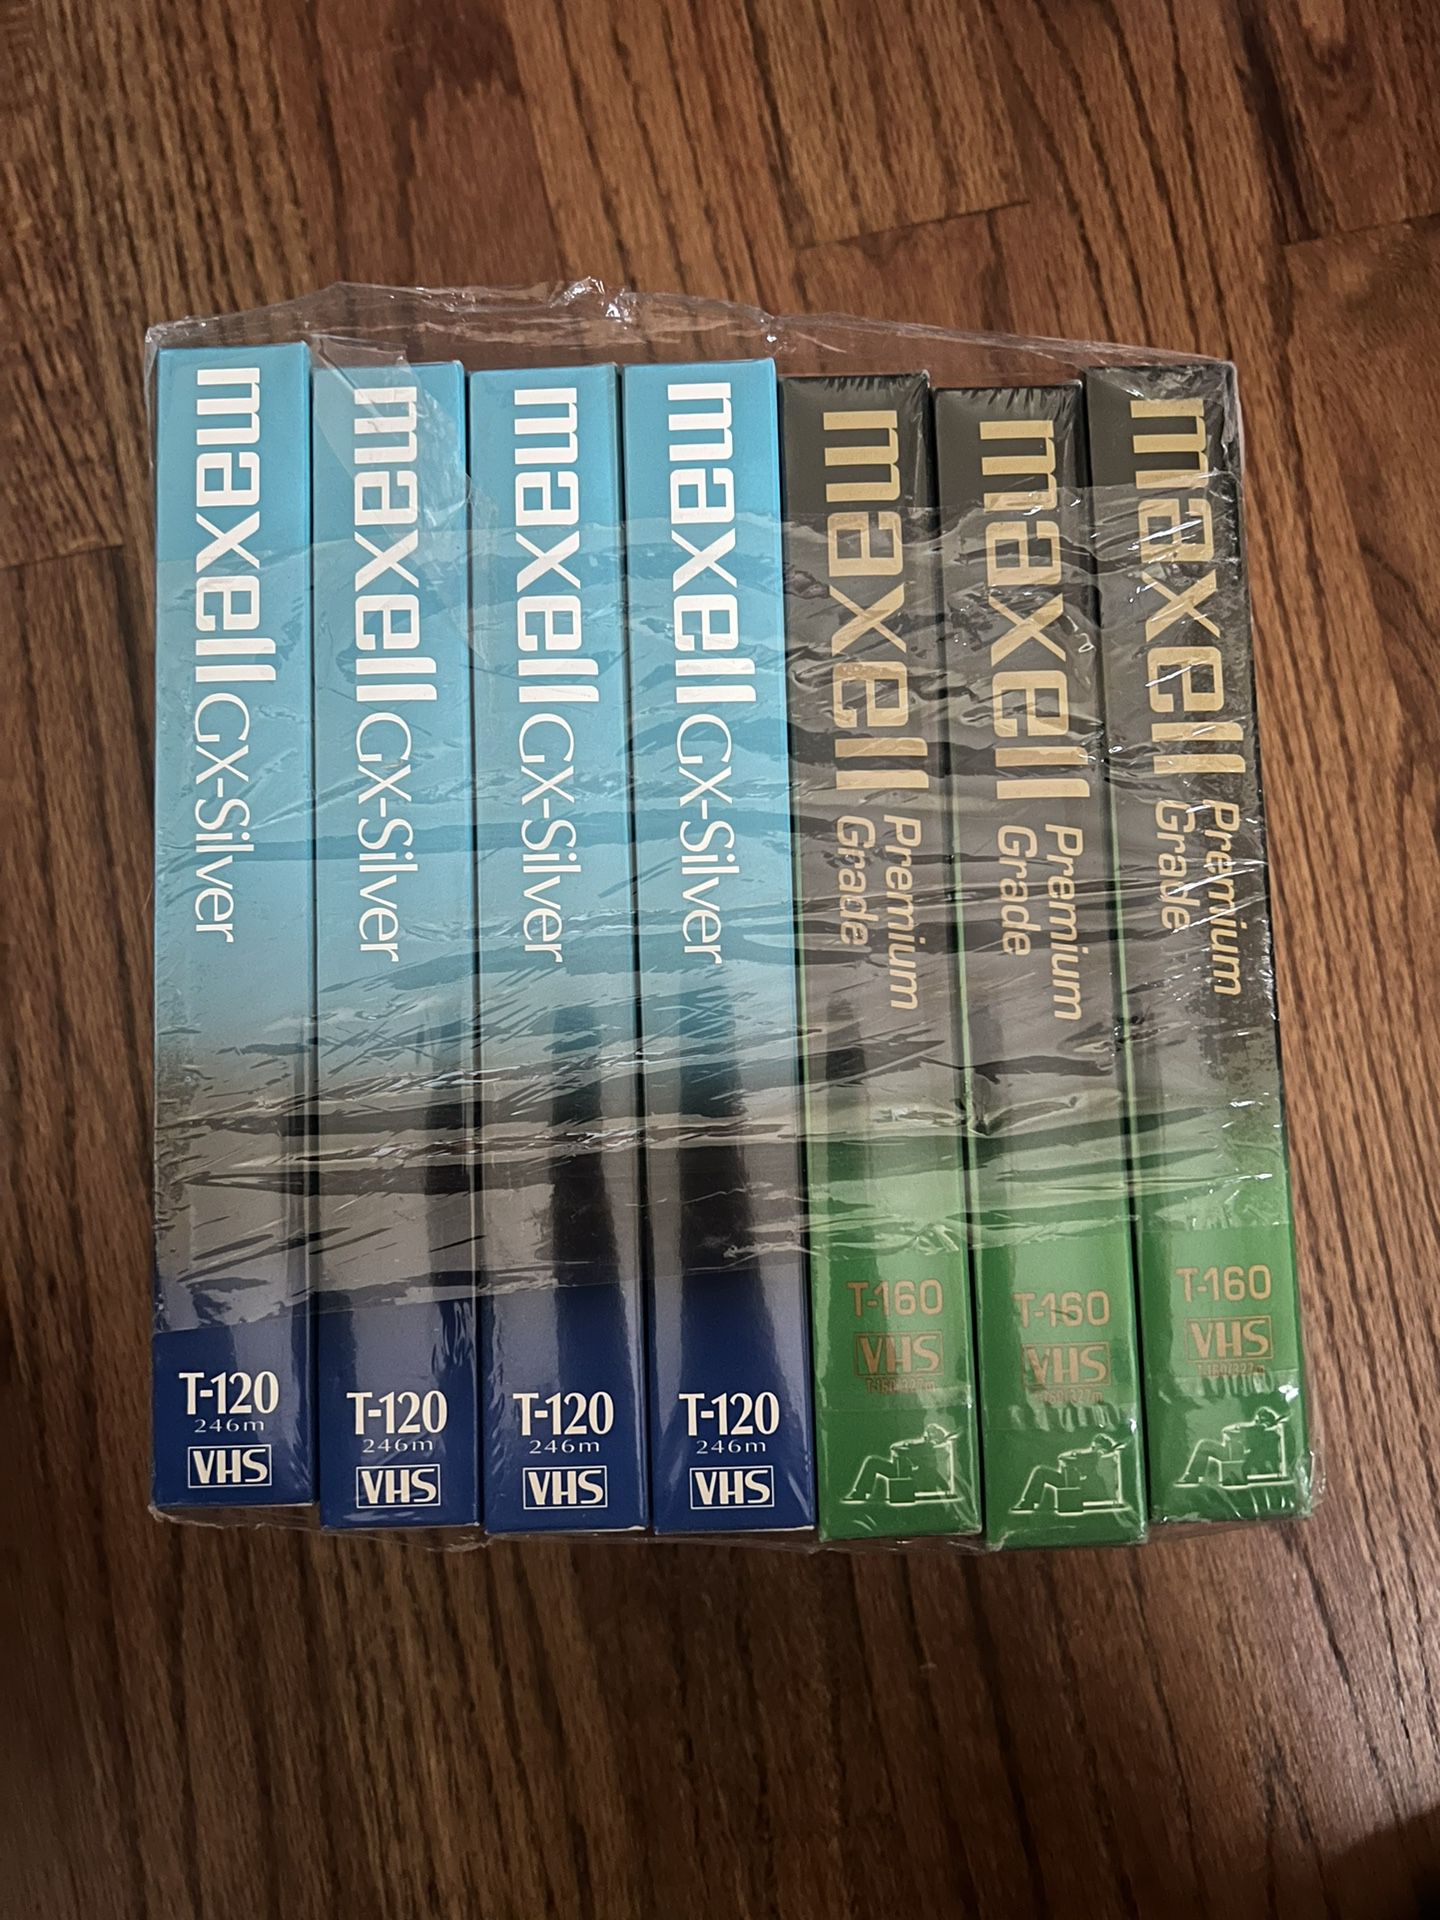 7 Vhs Tapes New Maxwell 